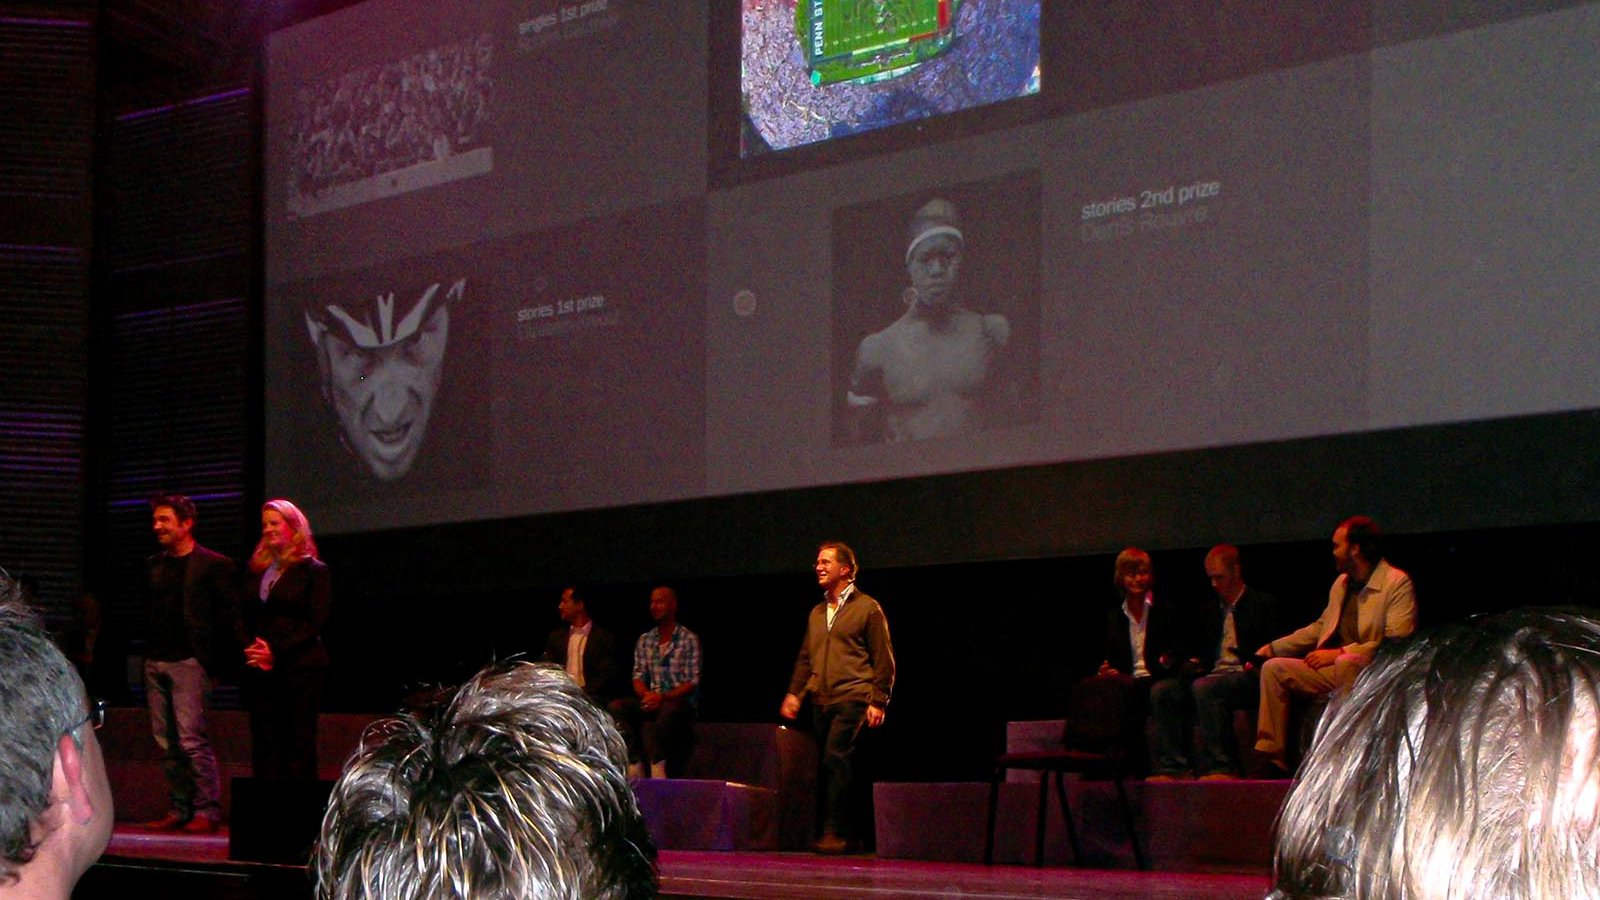 Press photo Mark Holtzman walking onstage in front of his award-winning photograph of the B-2 Bomber over the Rose Bowl at the 2010 Awards Ceremony in Amsterdam, Netherlands